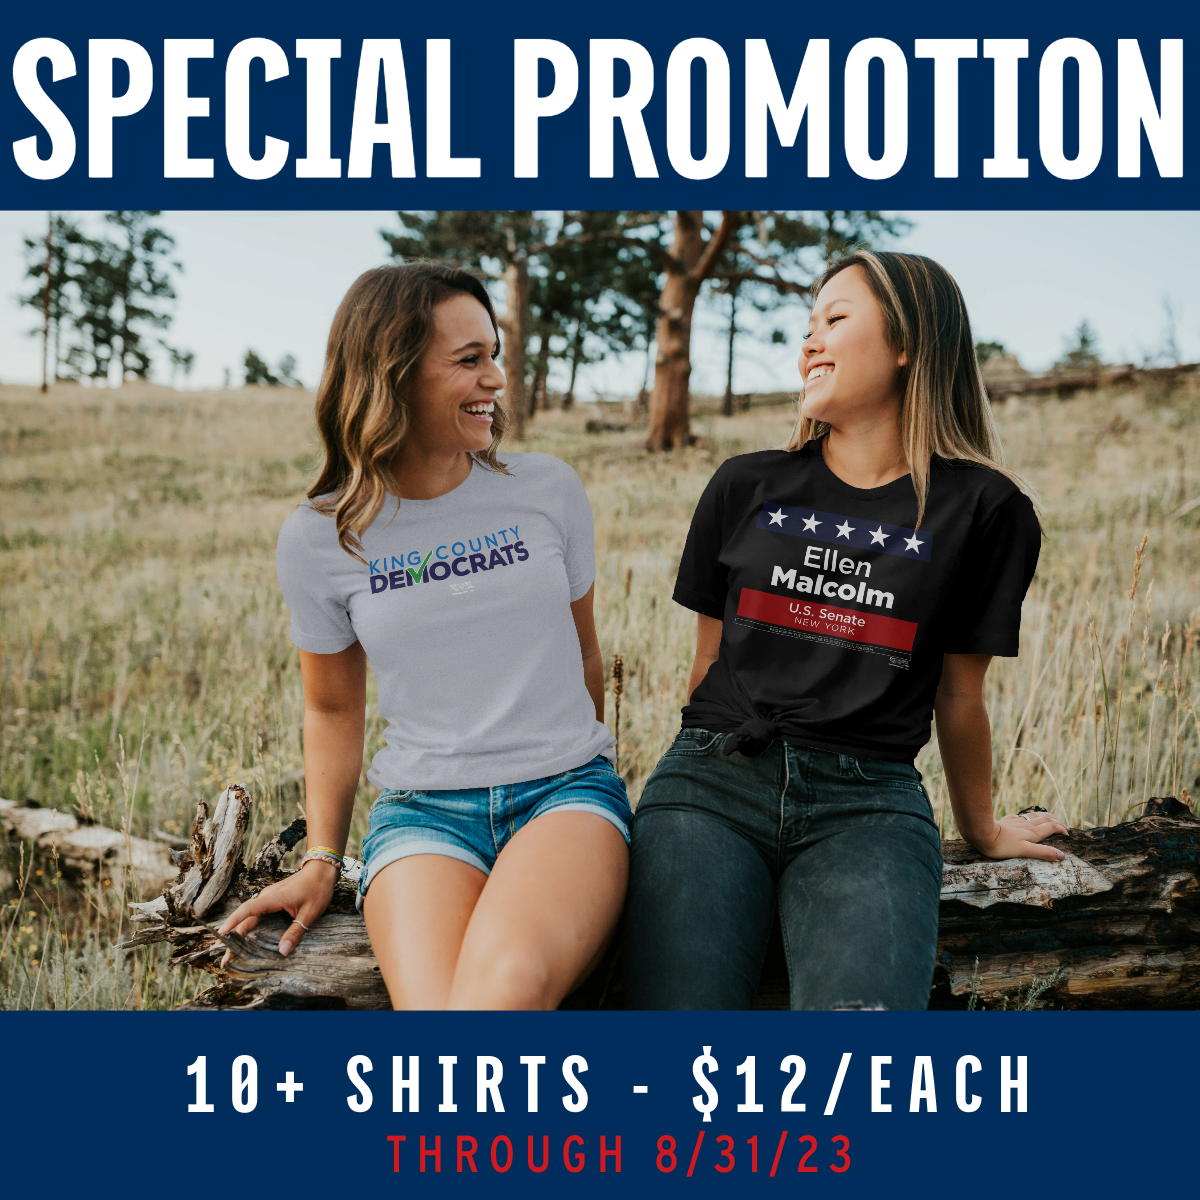 MerchBlue special t-shirt promotion, get 10 or more shirts for $12 each